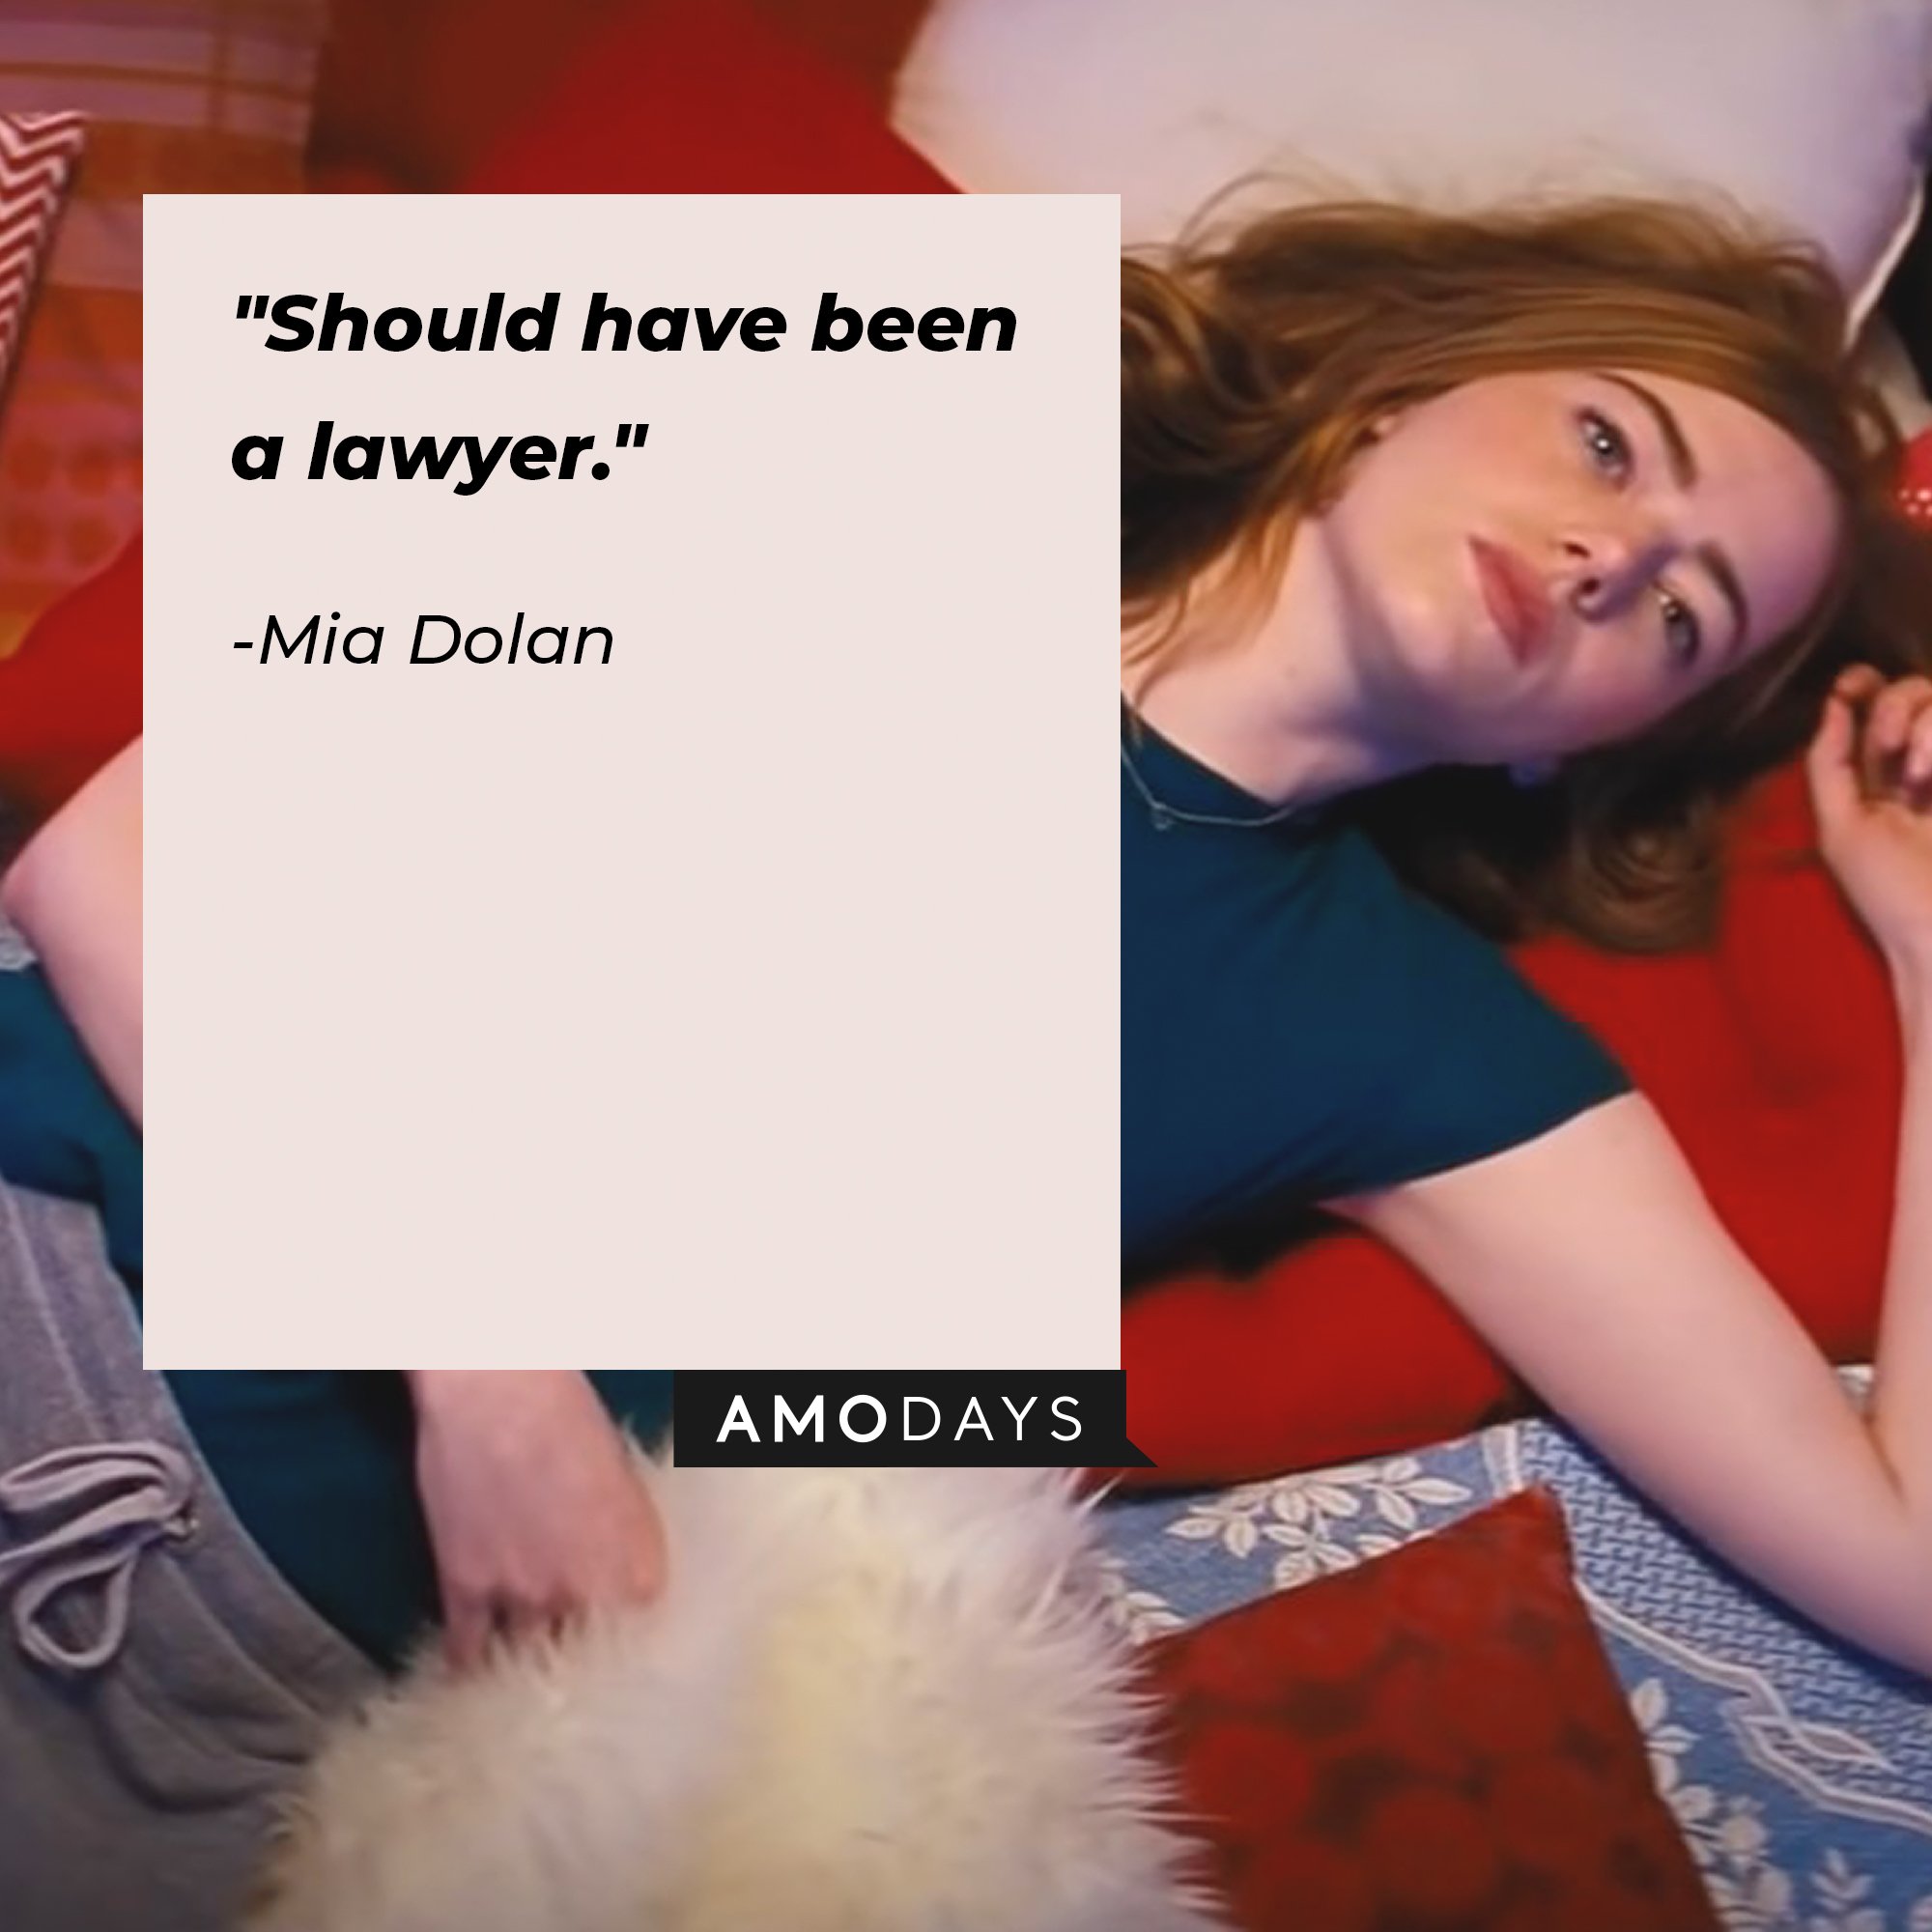 Mia Dolan's quote: "Should have been a lawyer." | Image: AmoDays